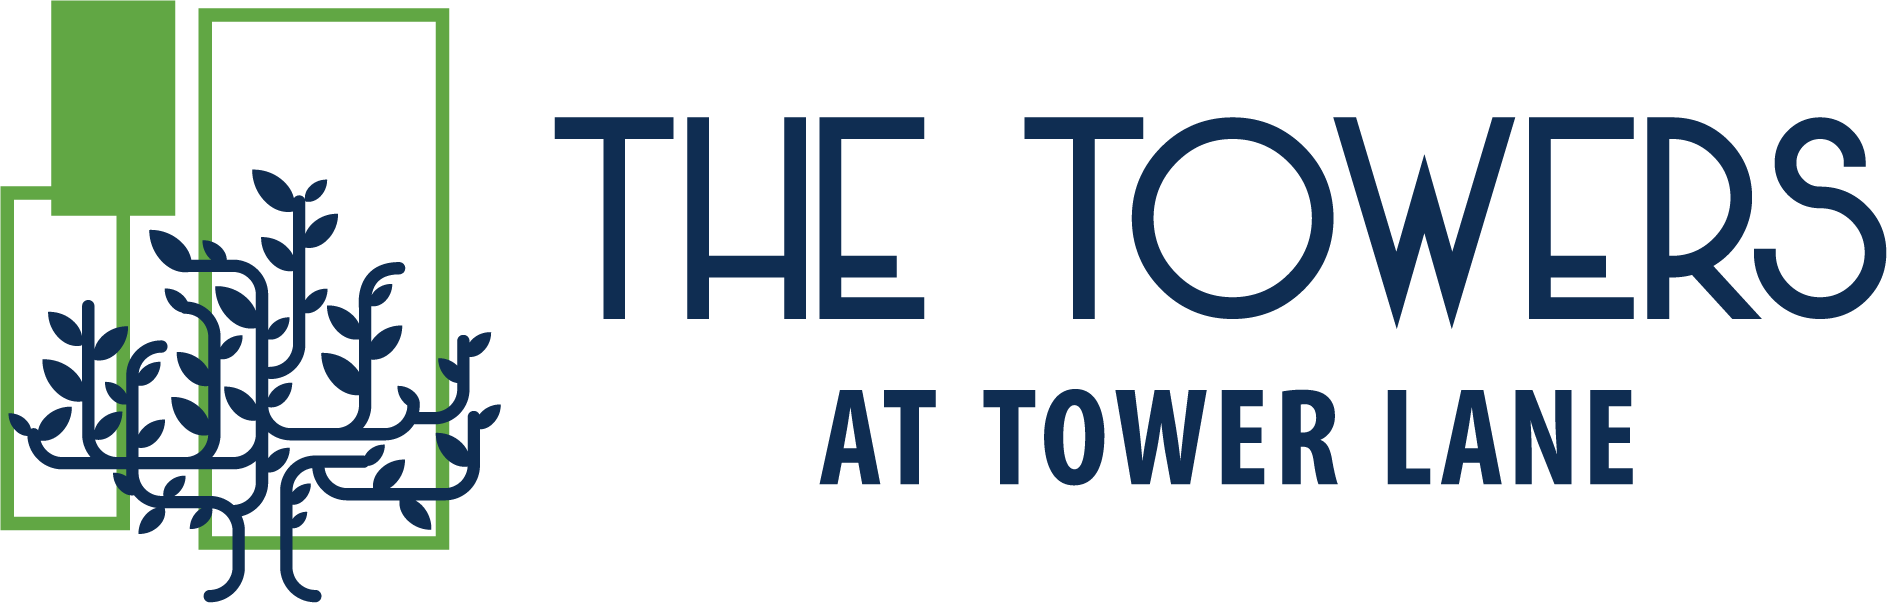 The Towers at Tower Lane, CT